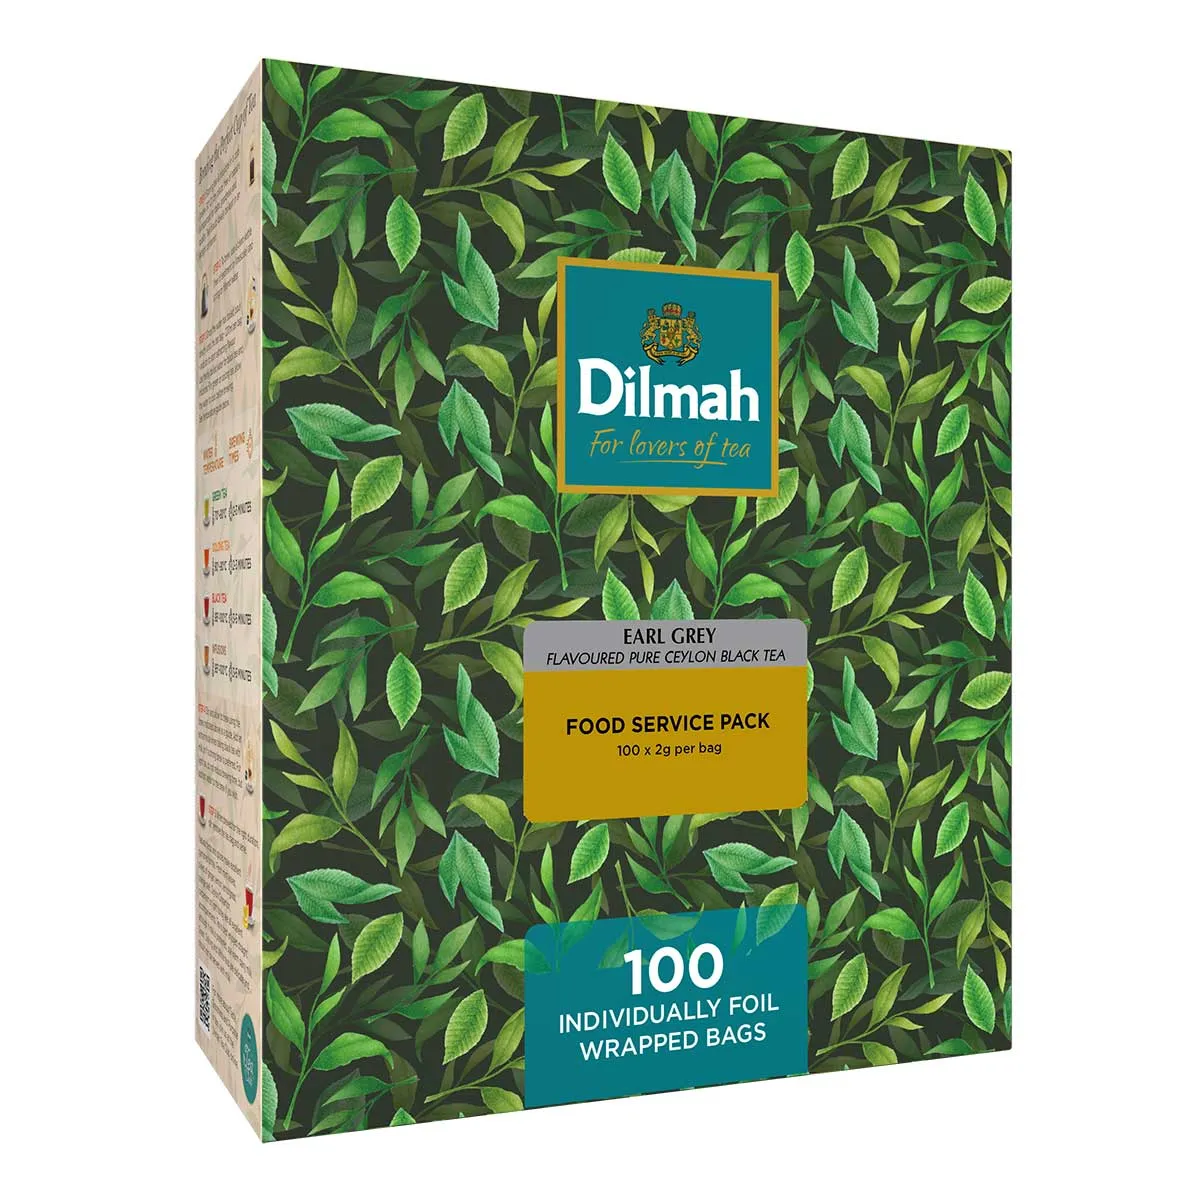 Carton with green leaves containing 100 tea bags of Dilmah Earl Grey